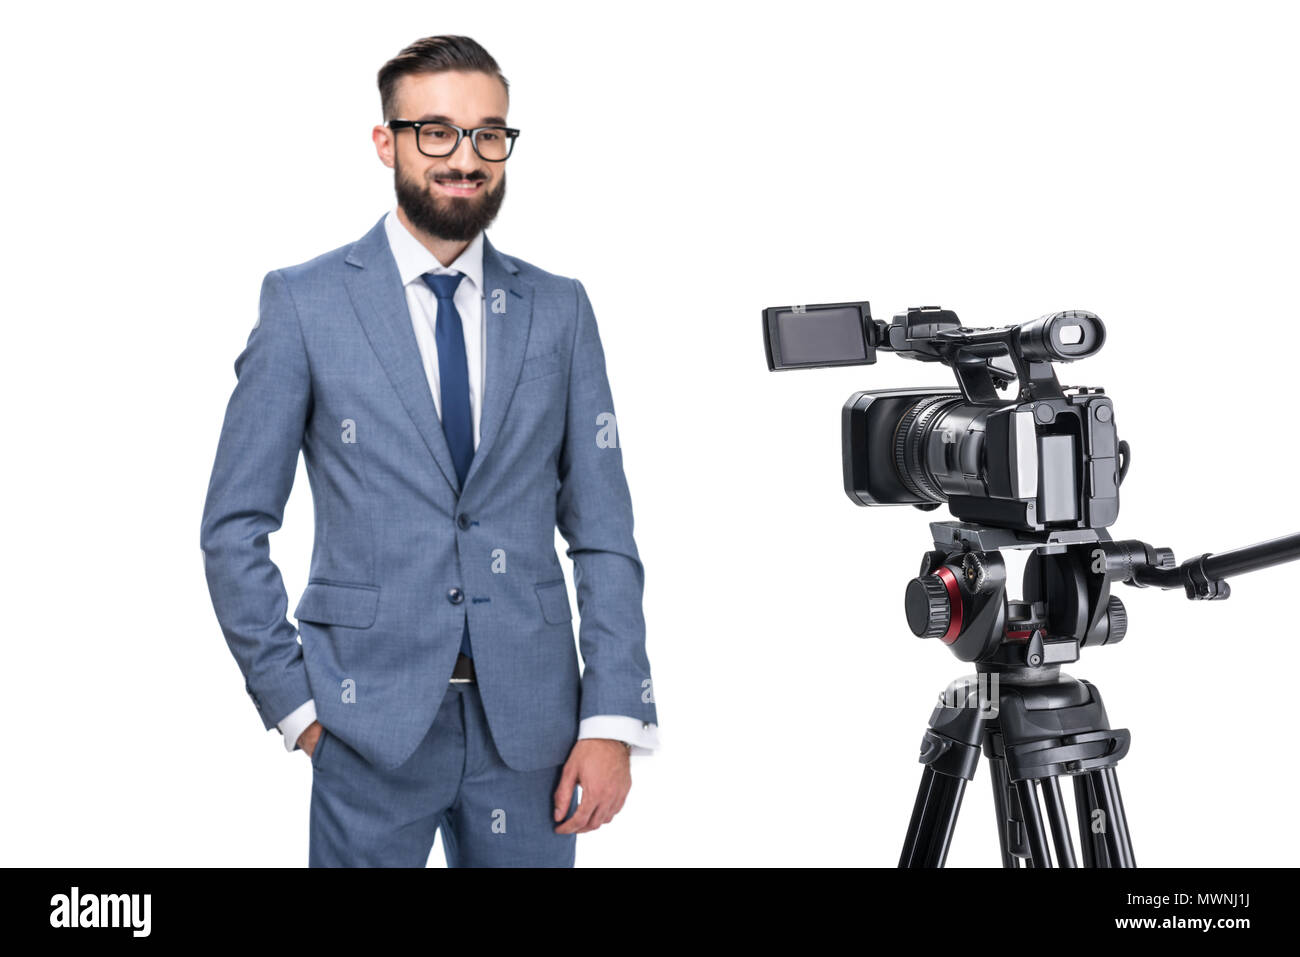 Journaliste de télévision smiling standing in front of camera, isolated on white Banque D'Images